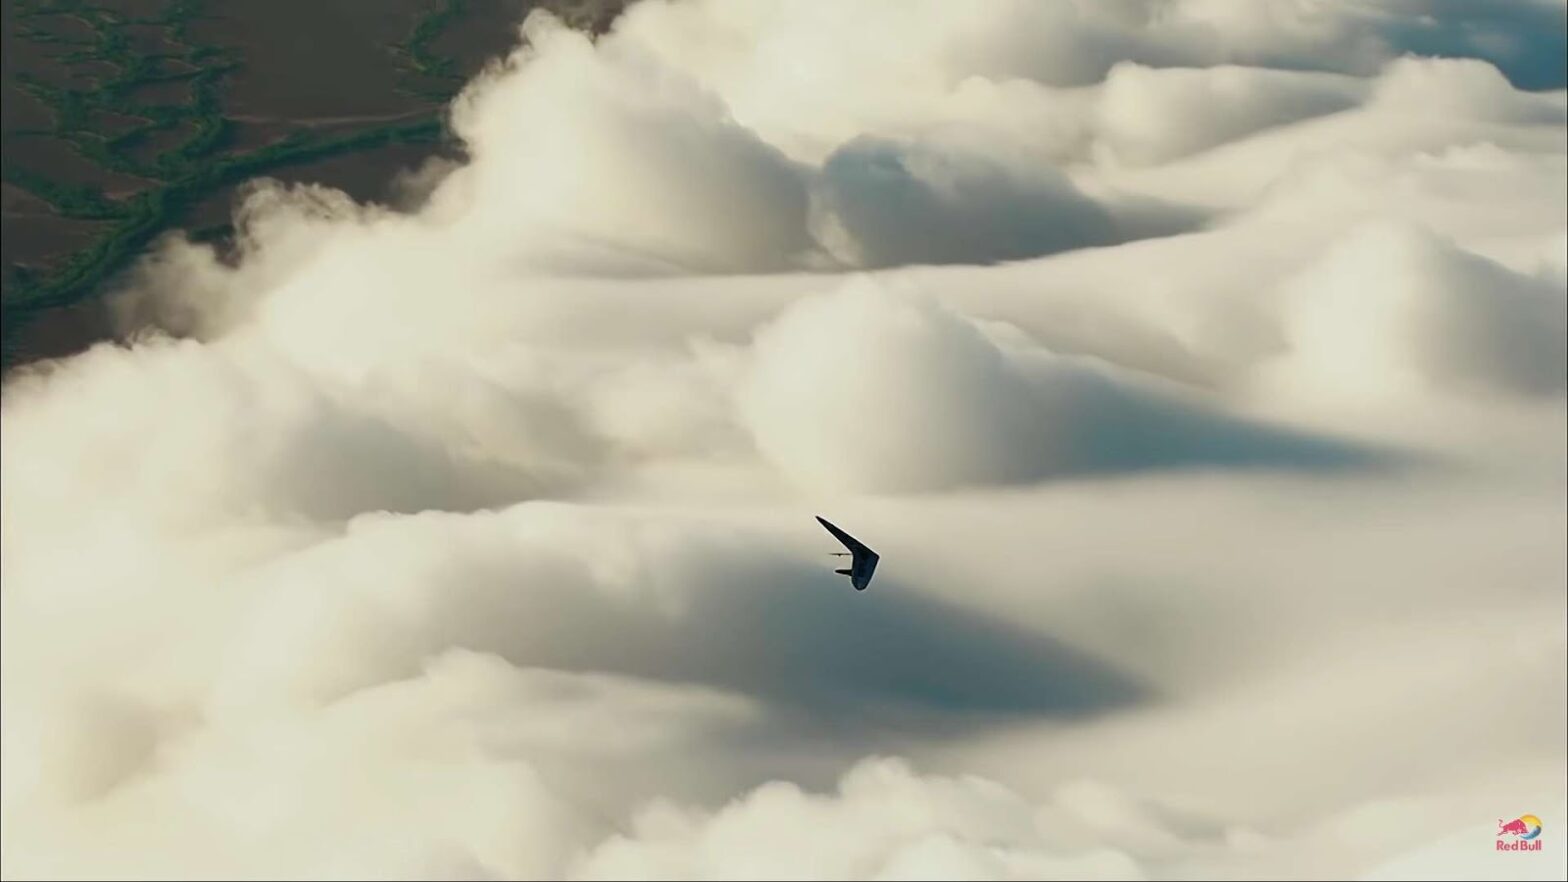 Human flying on a hang glide near clouds